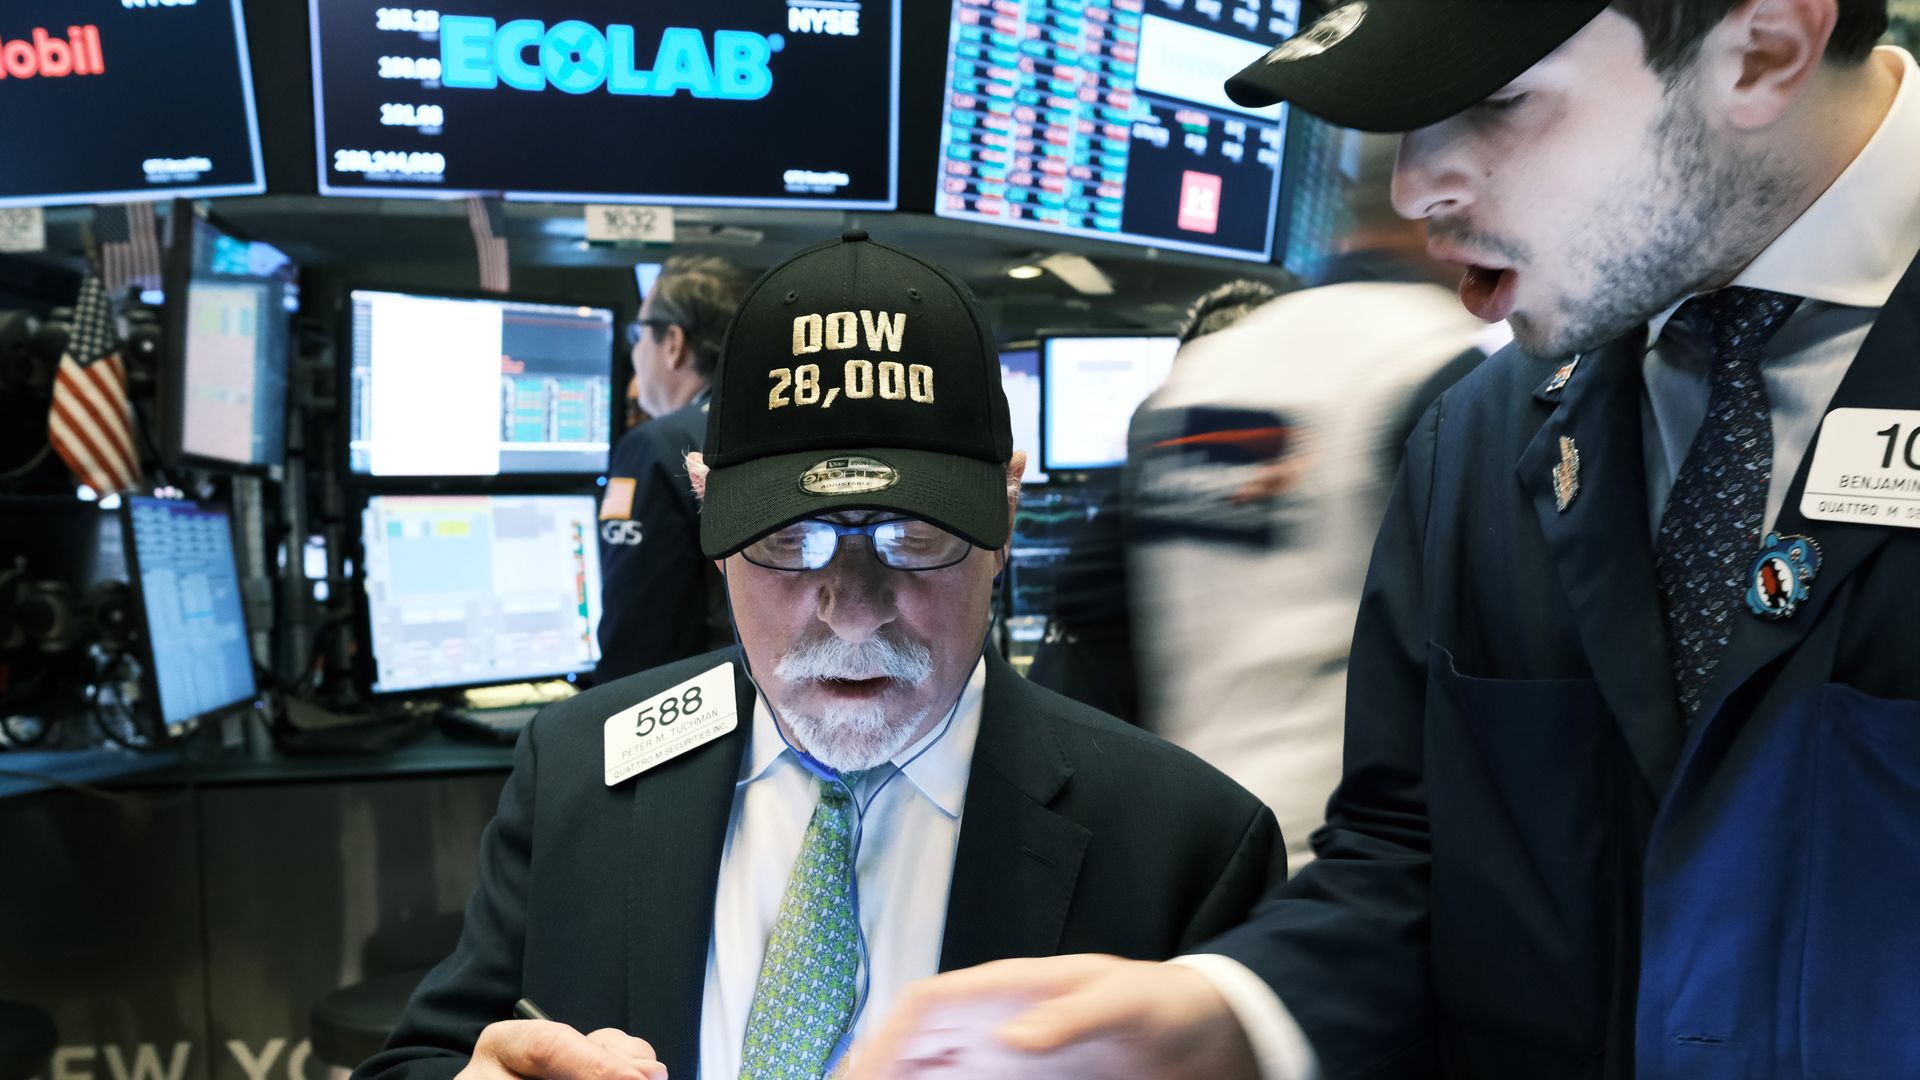 Traders wear "DOW 28,000" hats on the floor of the New York Stock Exchange (NYSE) on November 15, 2019 in New York City